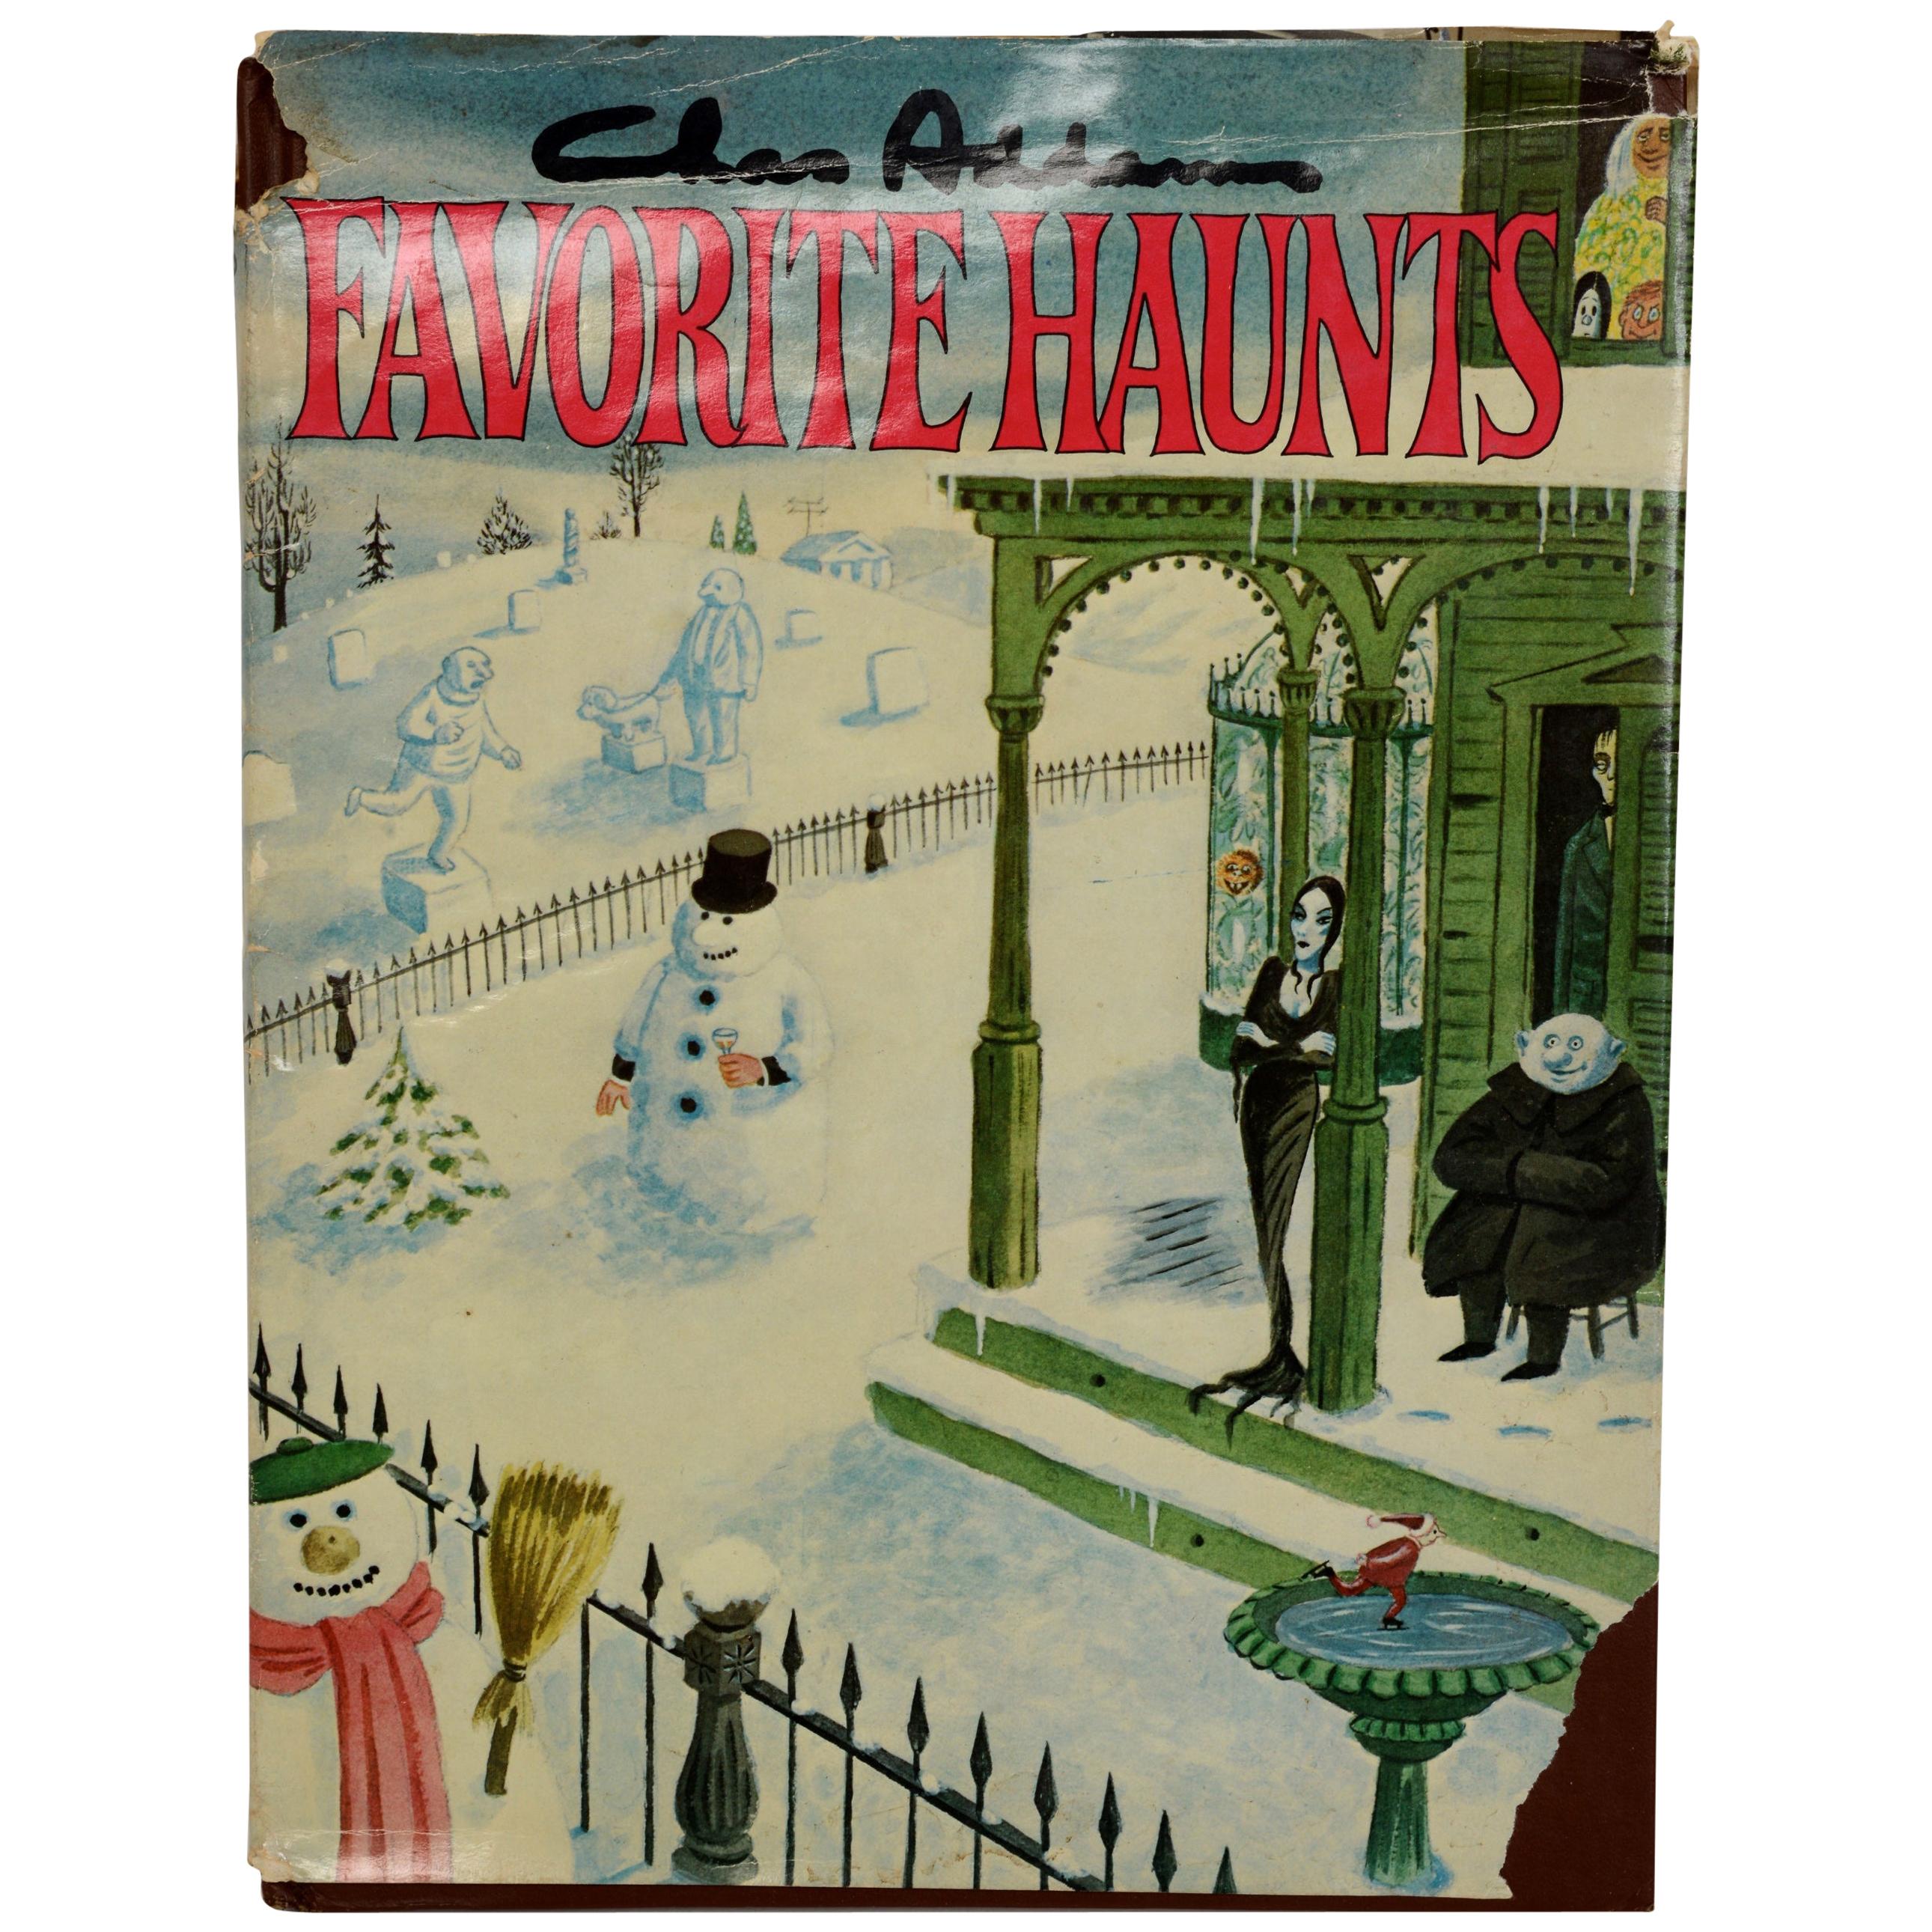 Chas Addams' Favorite Haunts by Charles Addams, First Edition